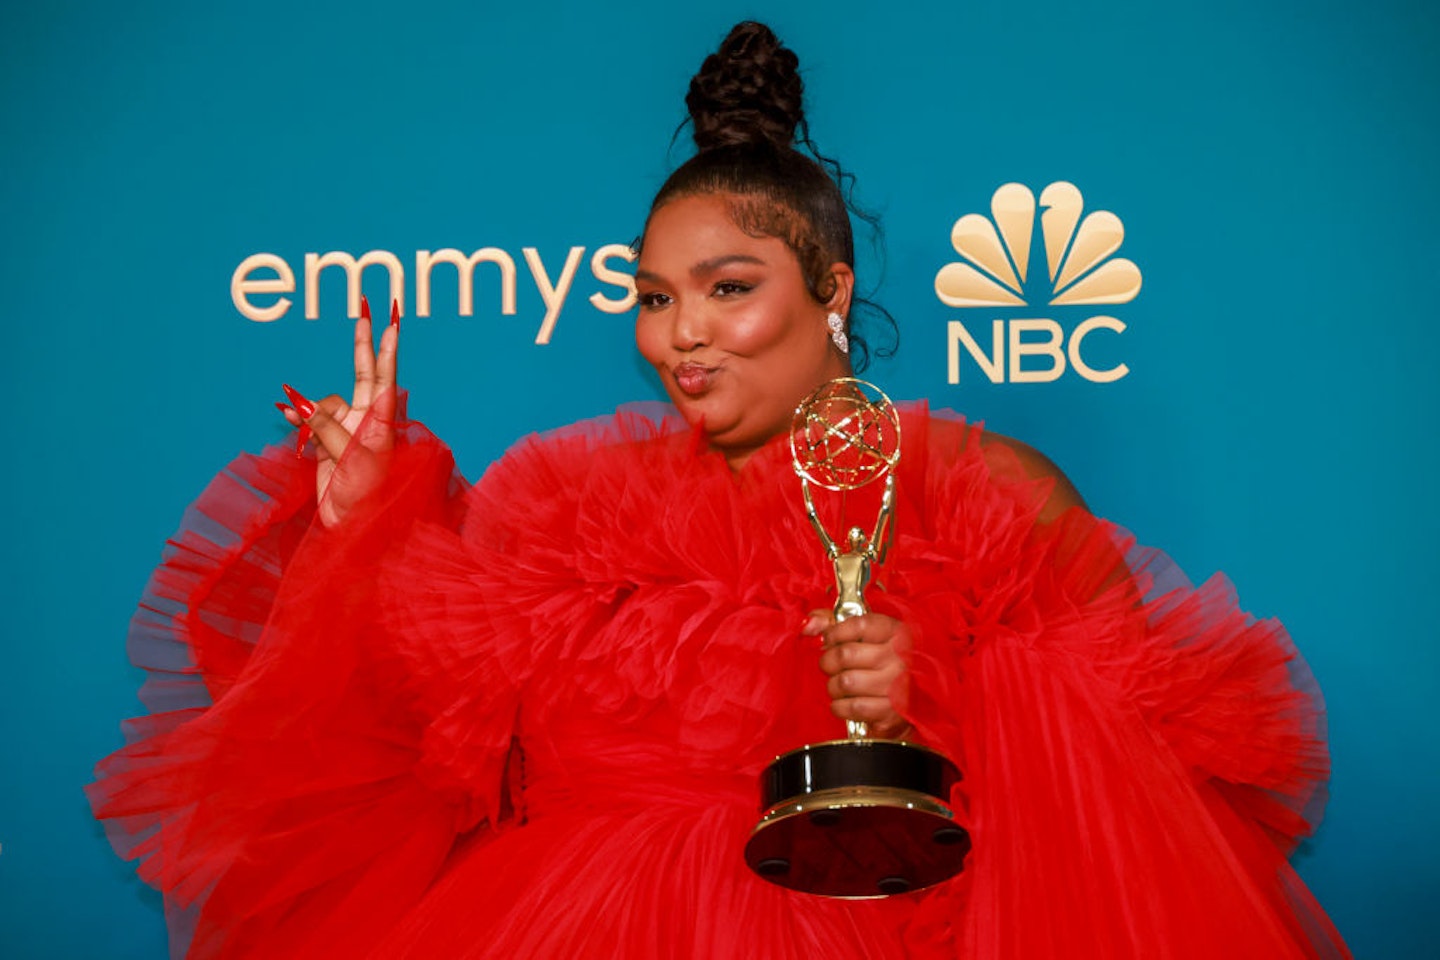 Emmys 2022: The Best Dressed Stars on the Red Carpet